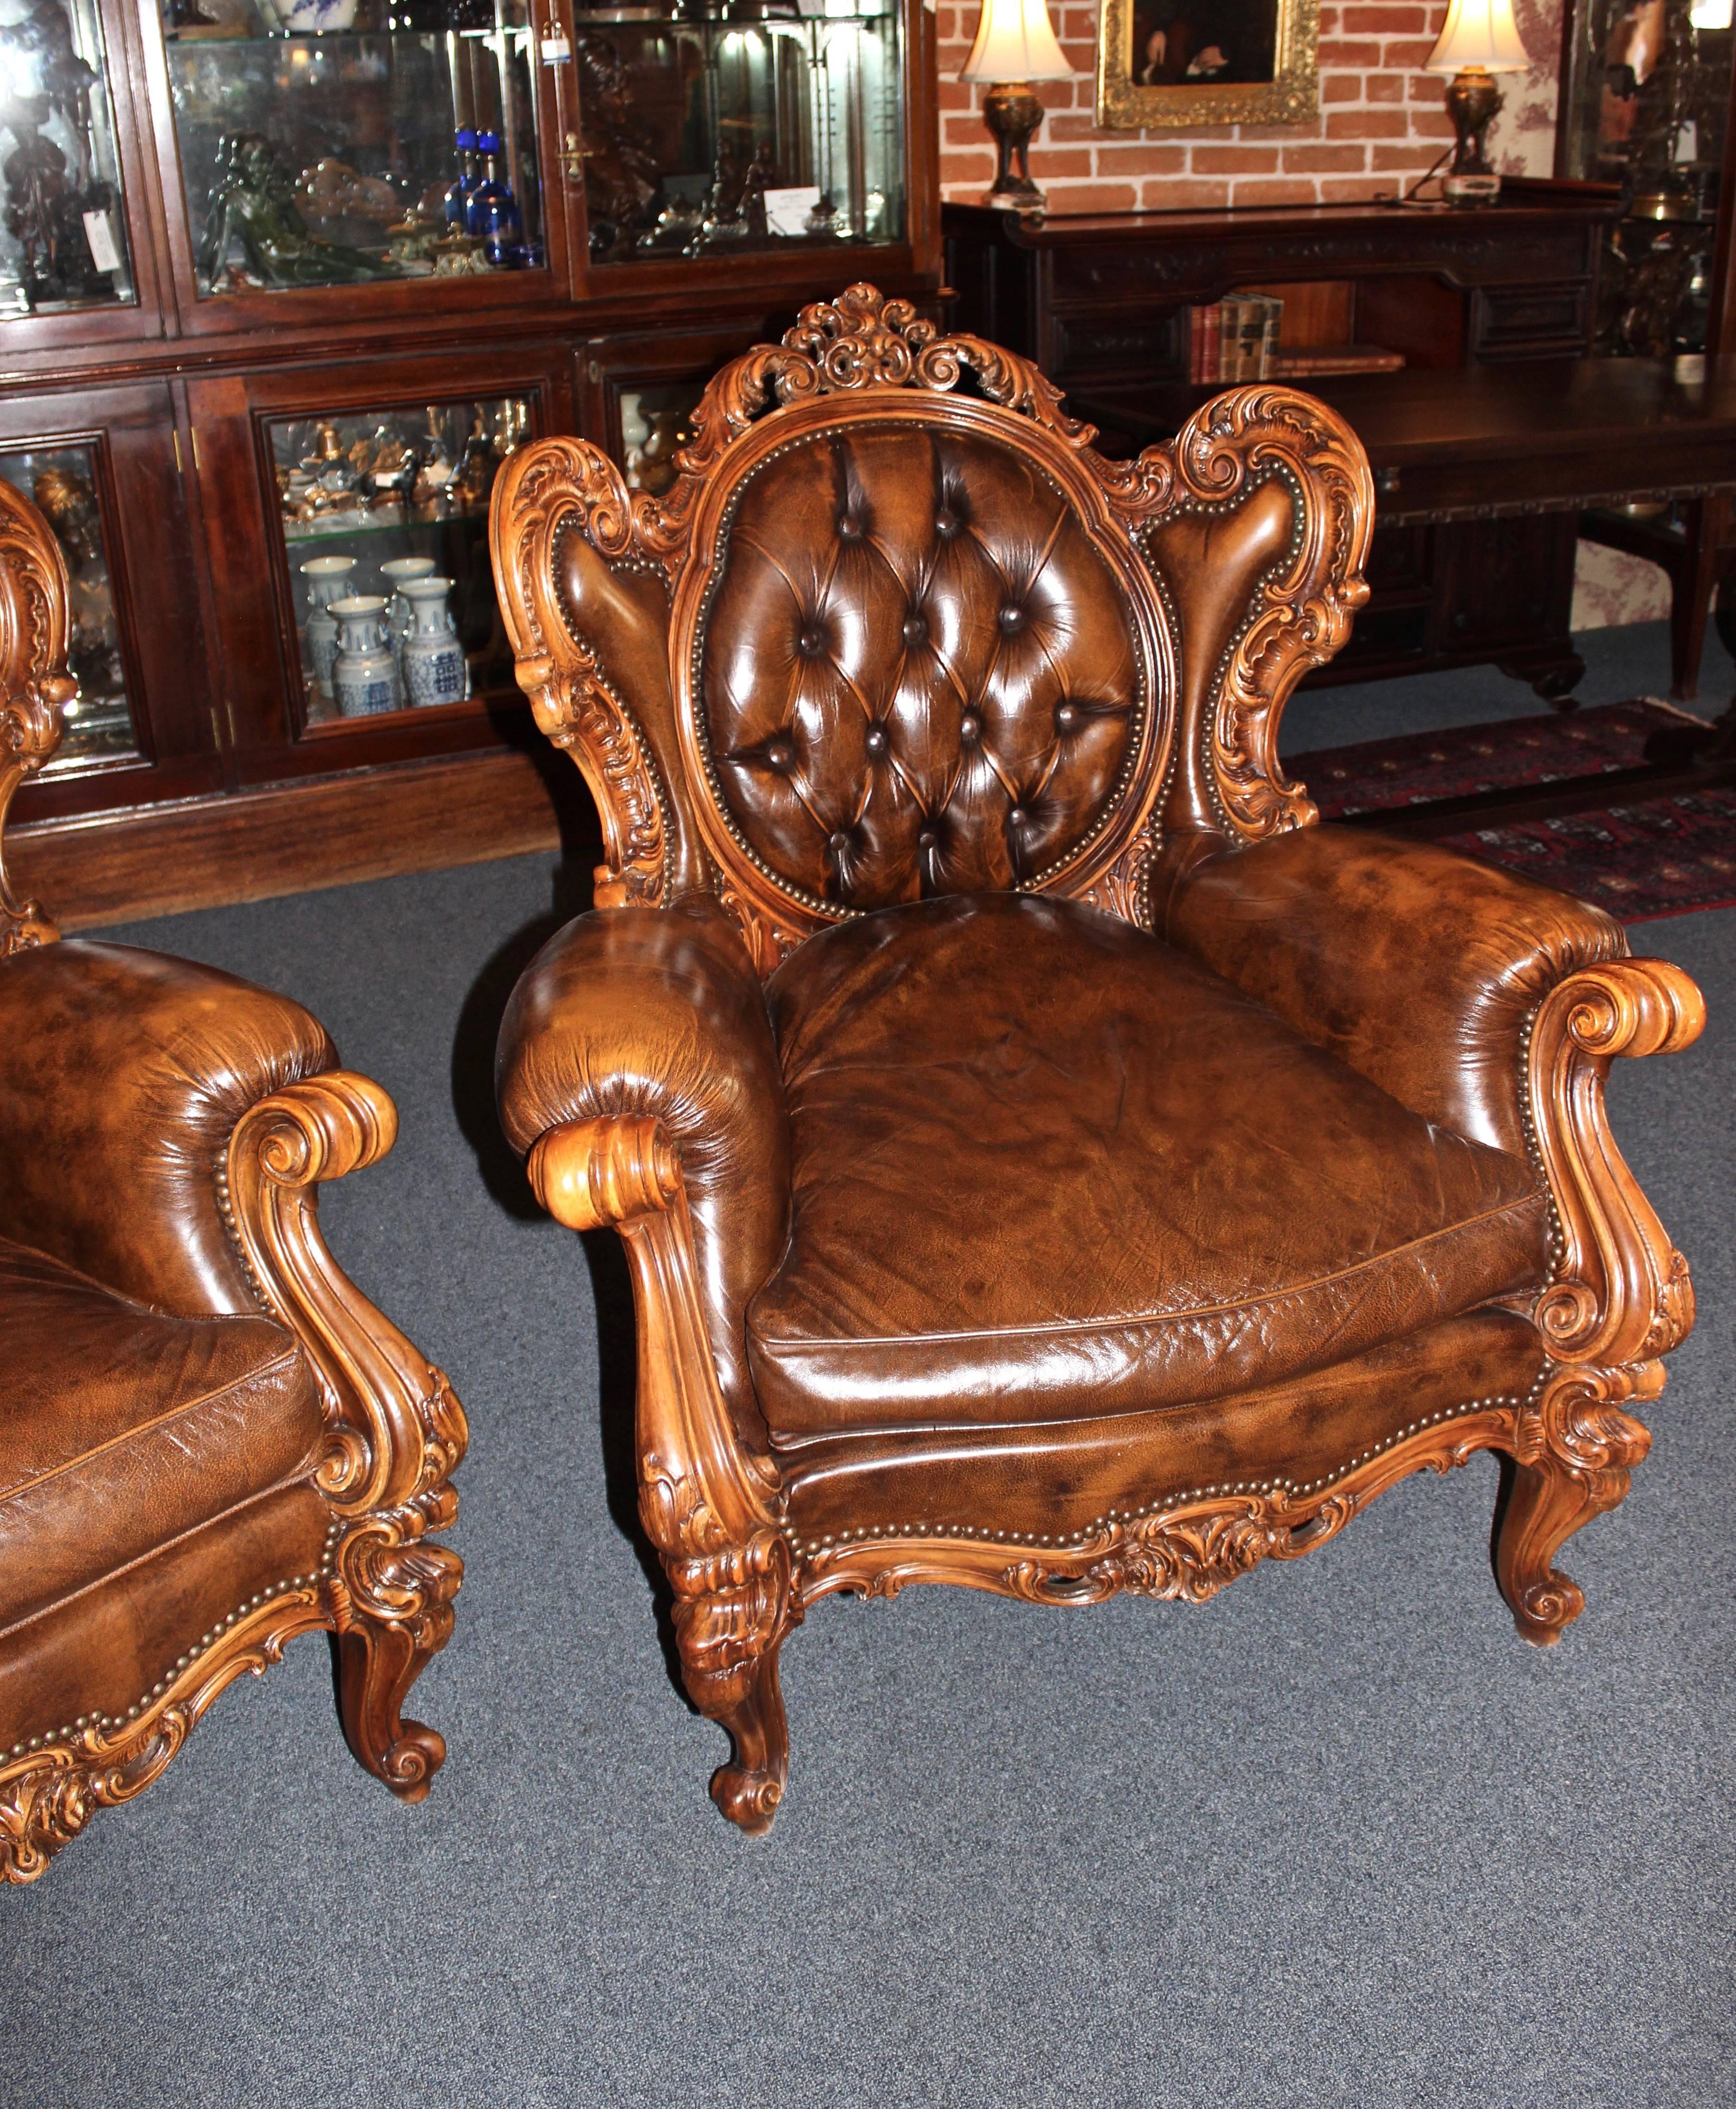 20th Century French Rococo Three-Piece Parlour Set In Excellent Condition For Sale In Santa Ana, CA